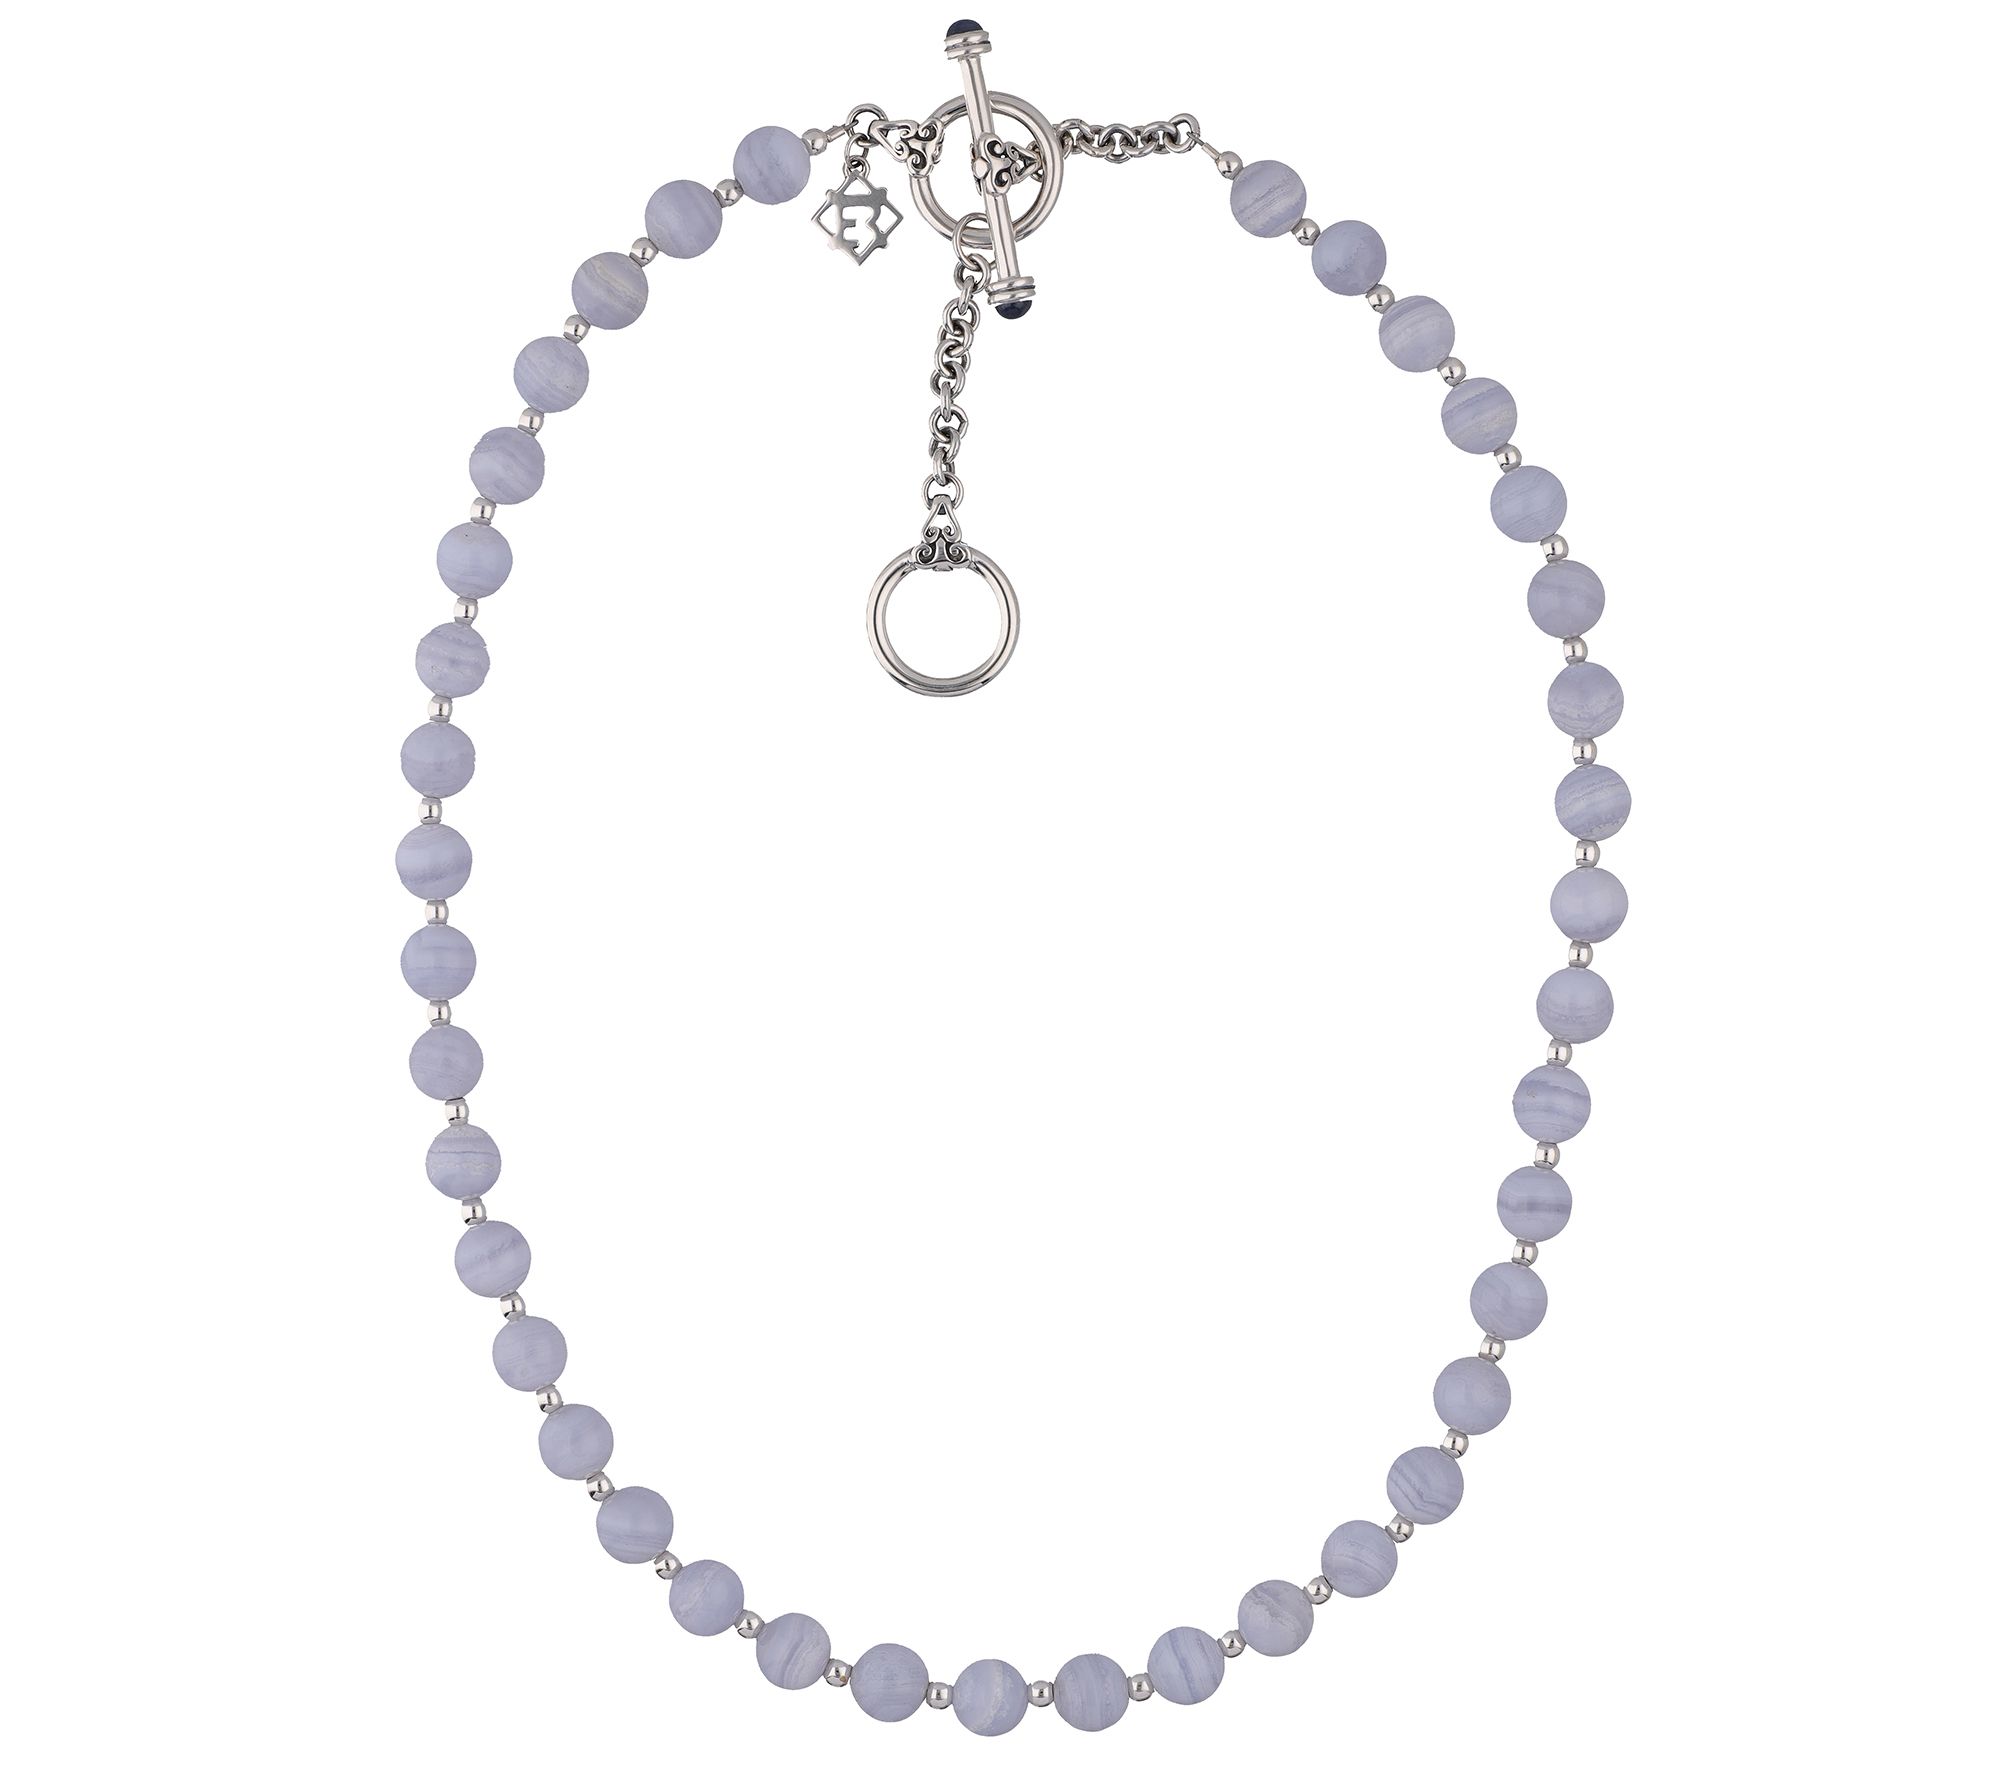 Elyse Ryan Sterling Blue Lace Agate Bead Necklace - QVC.com